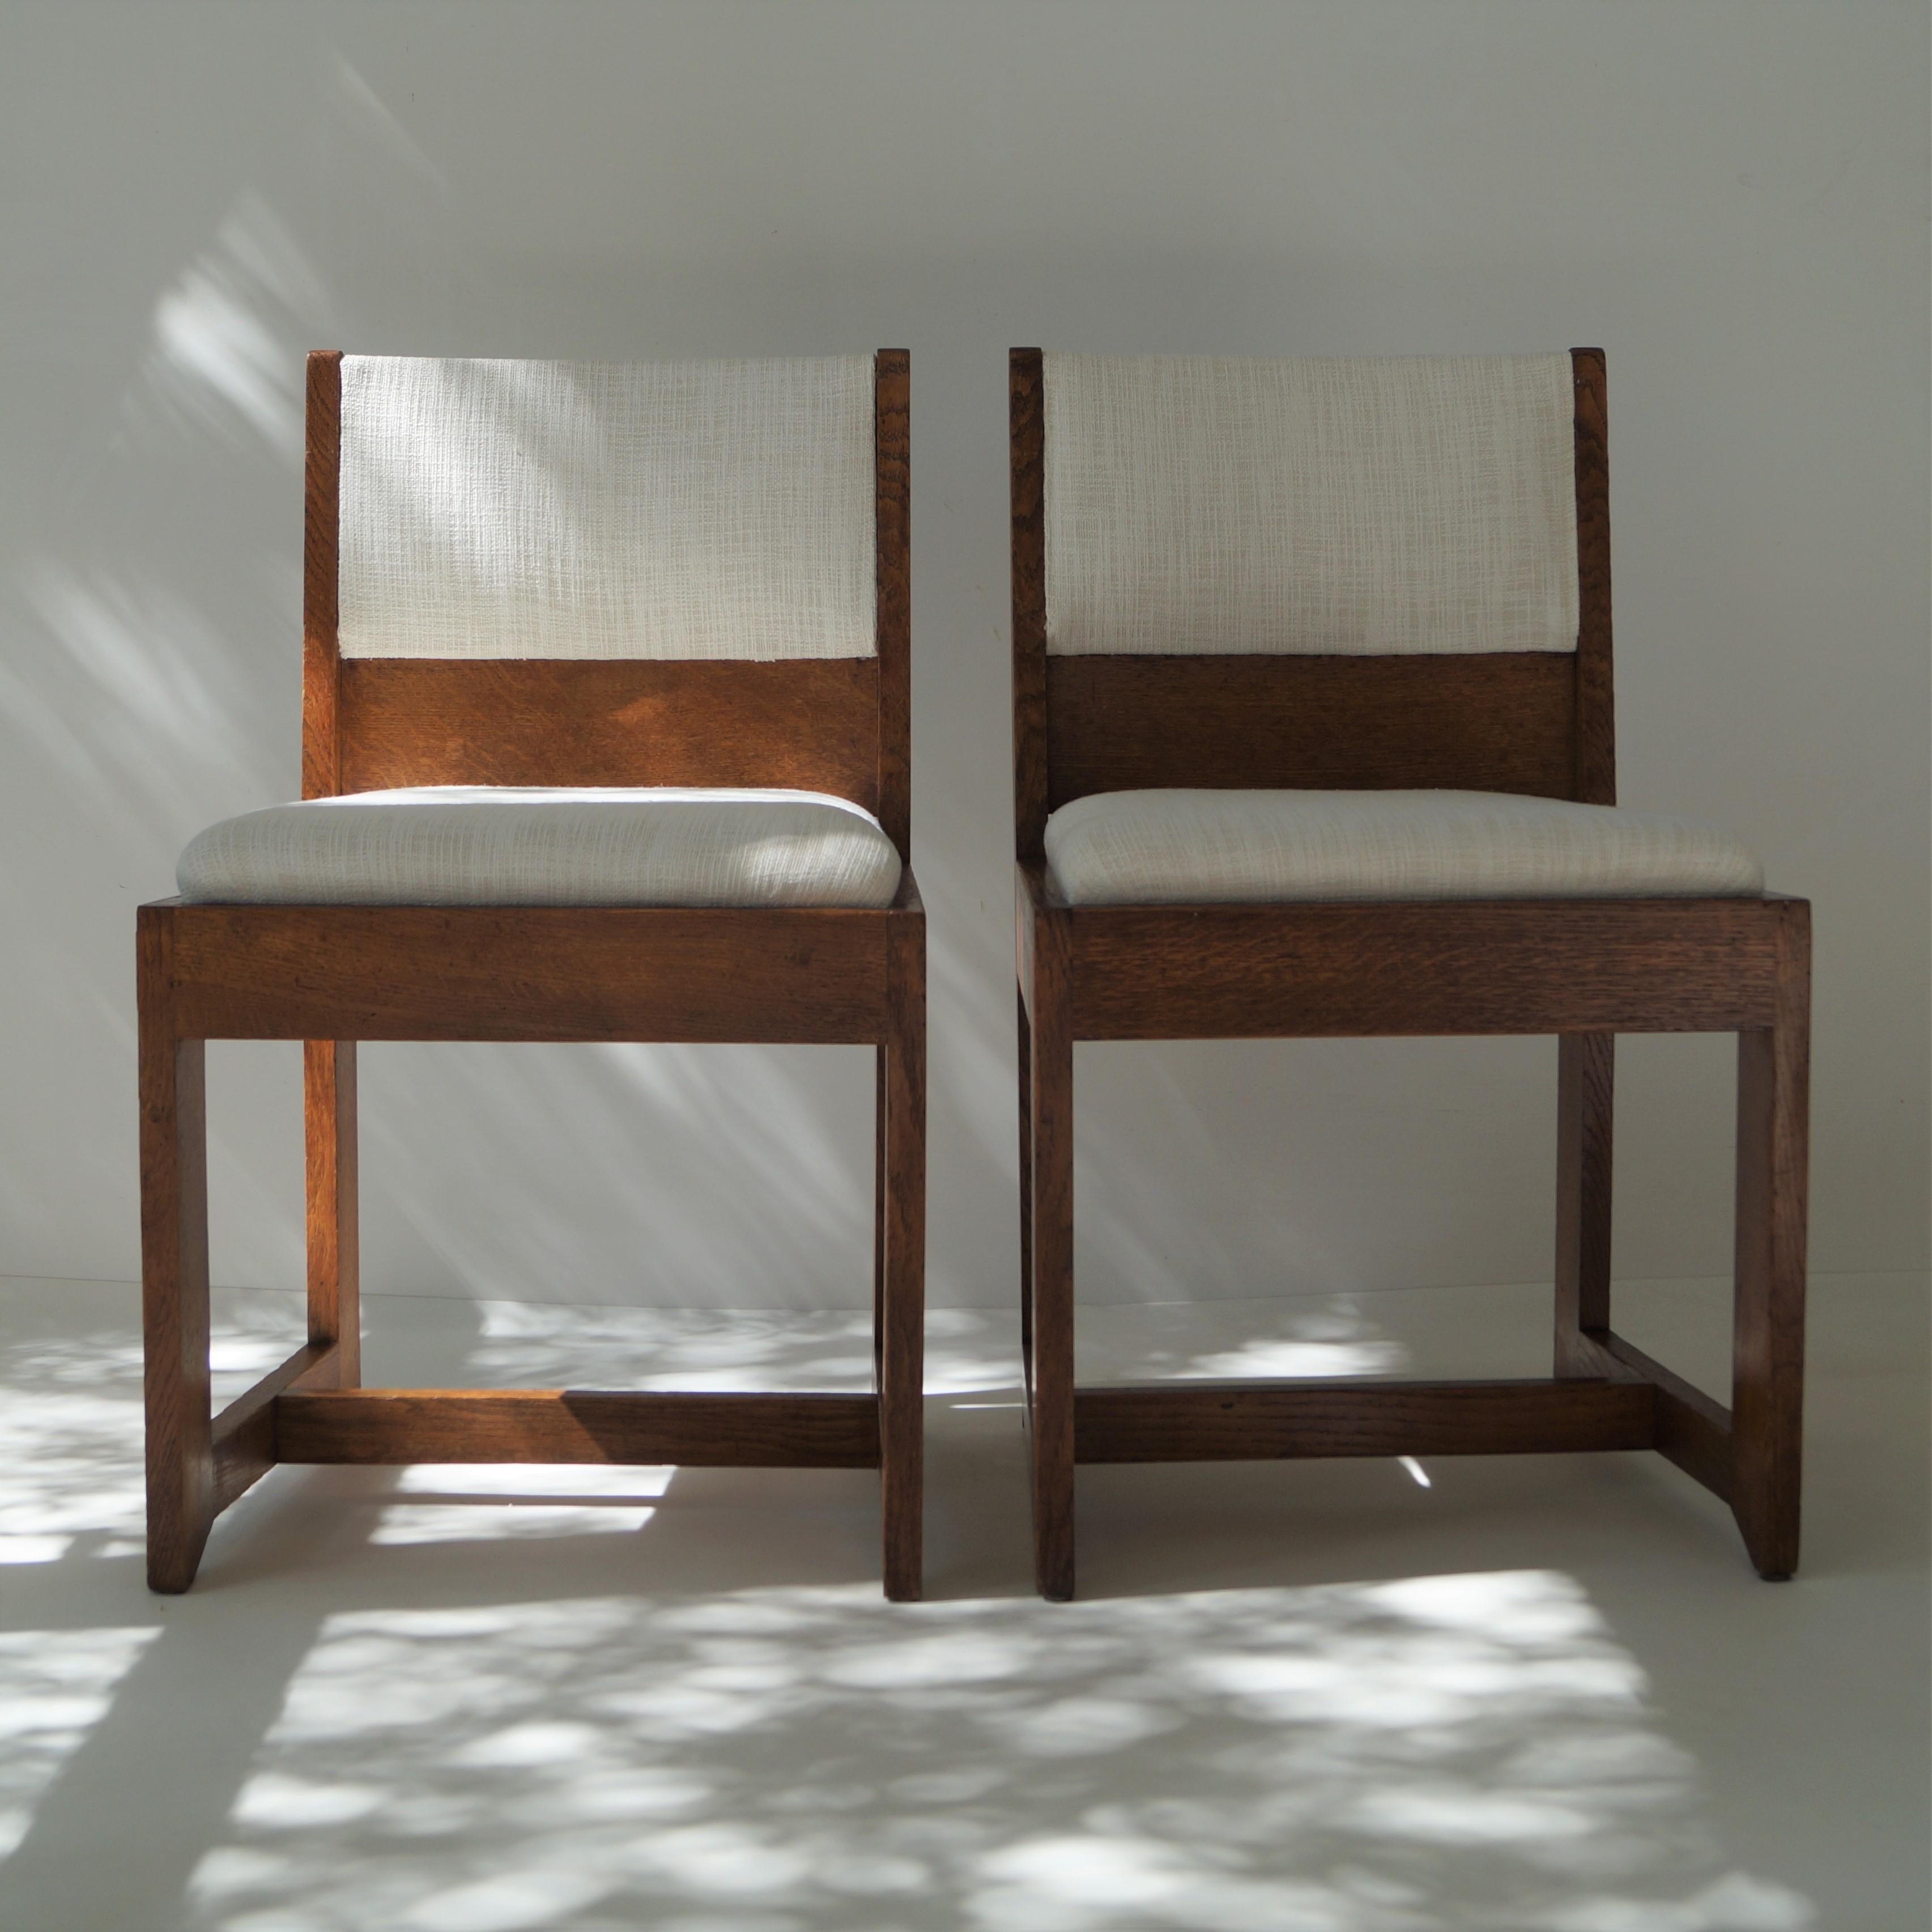 Dutch Art Deco Modernist set of chairs by H. Wouda for Pander, 1924 For Sale 3